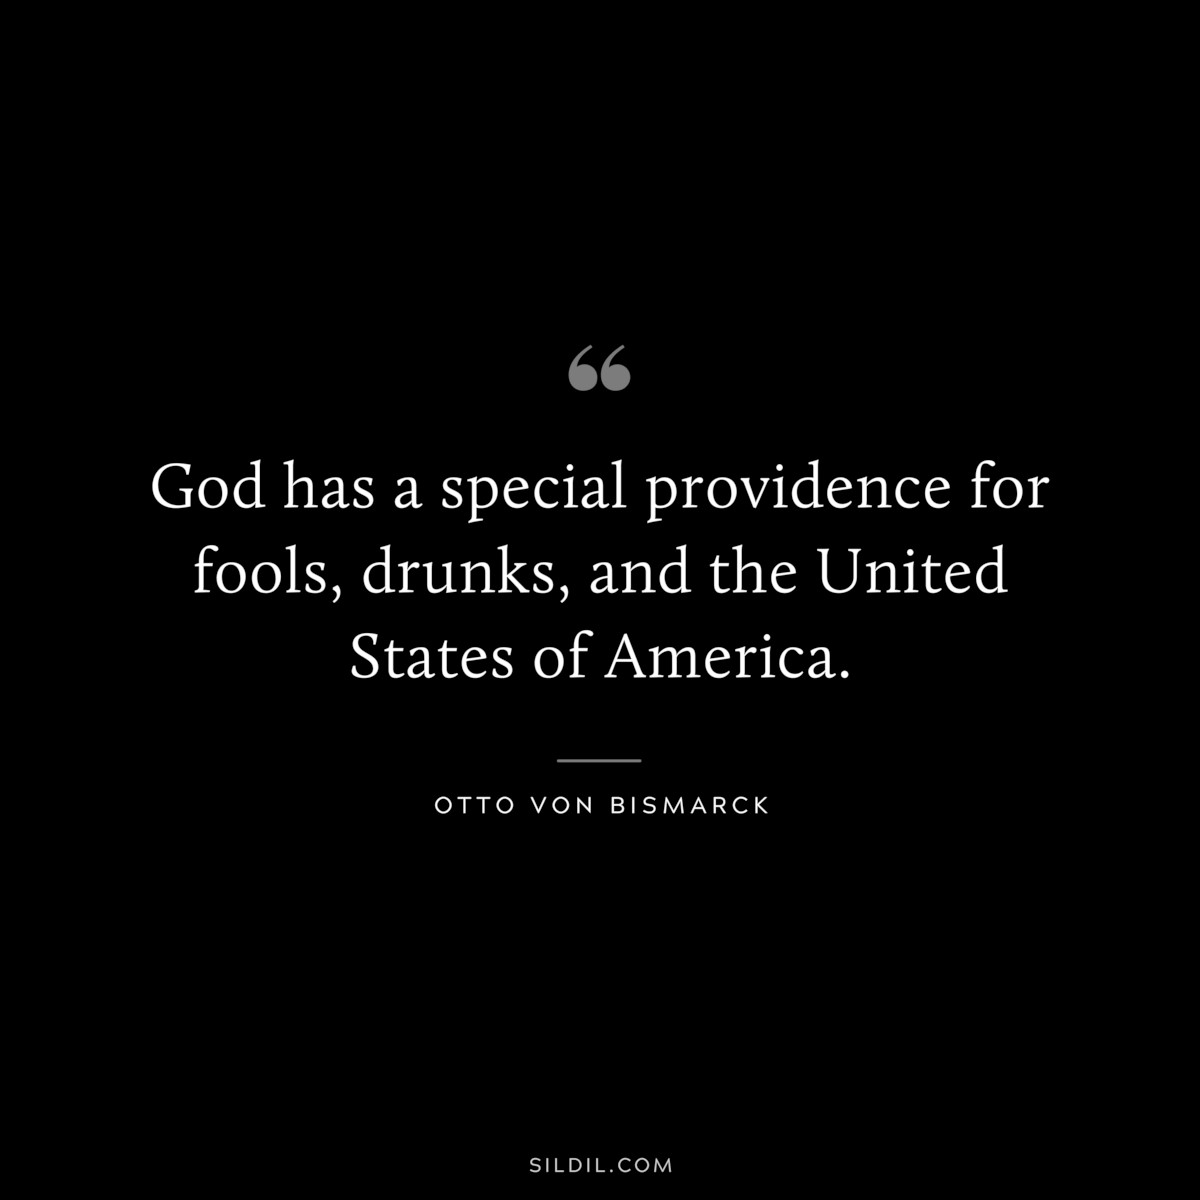 God has a special providence for fools, drunks, and the United States of America. ― Otto von Bismarck